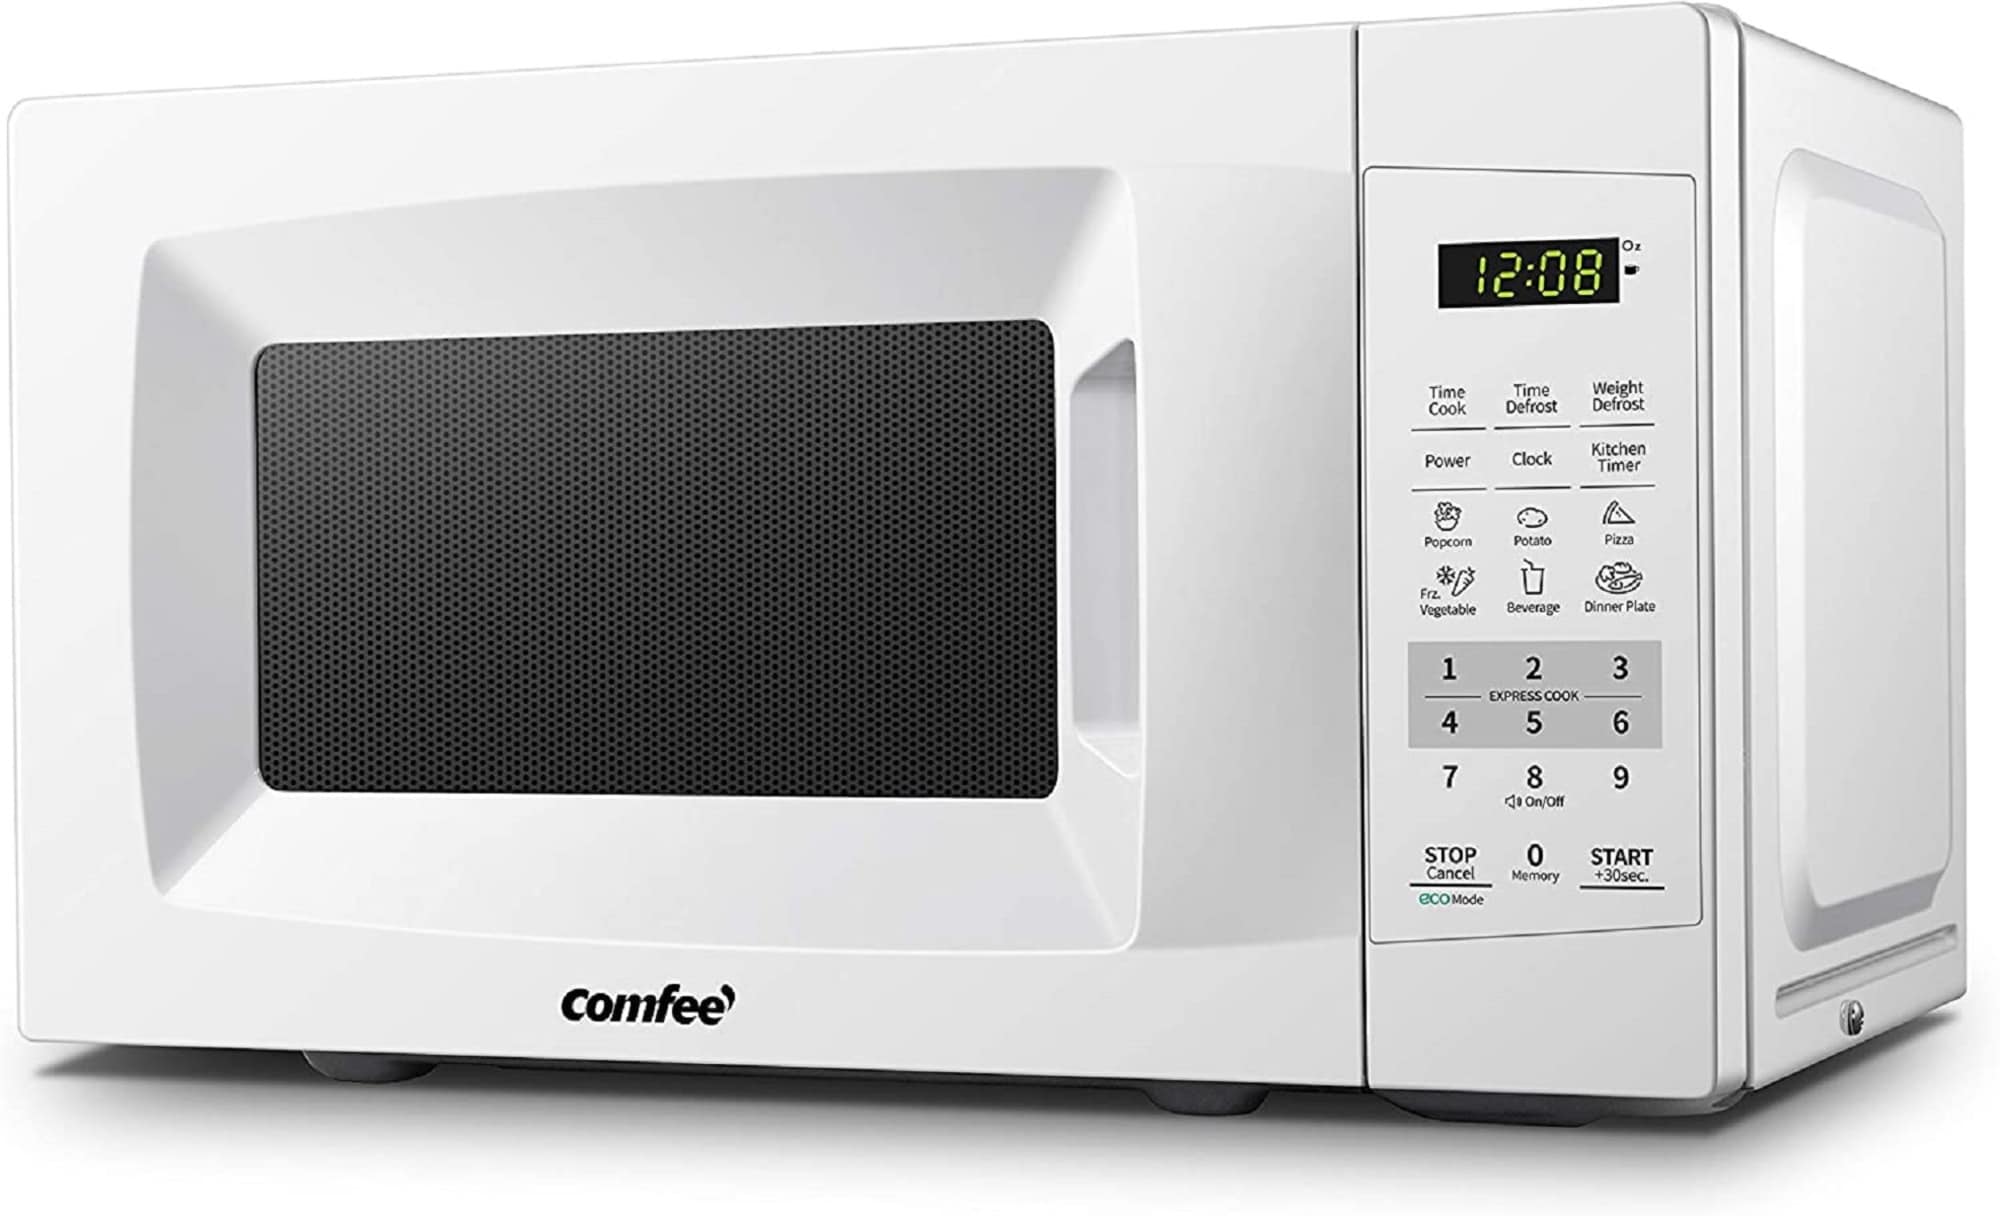 0.7 Cu Ft Microwave Oven, 700 Watts, White